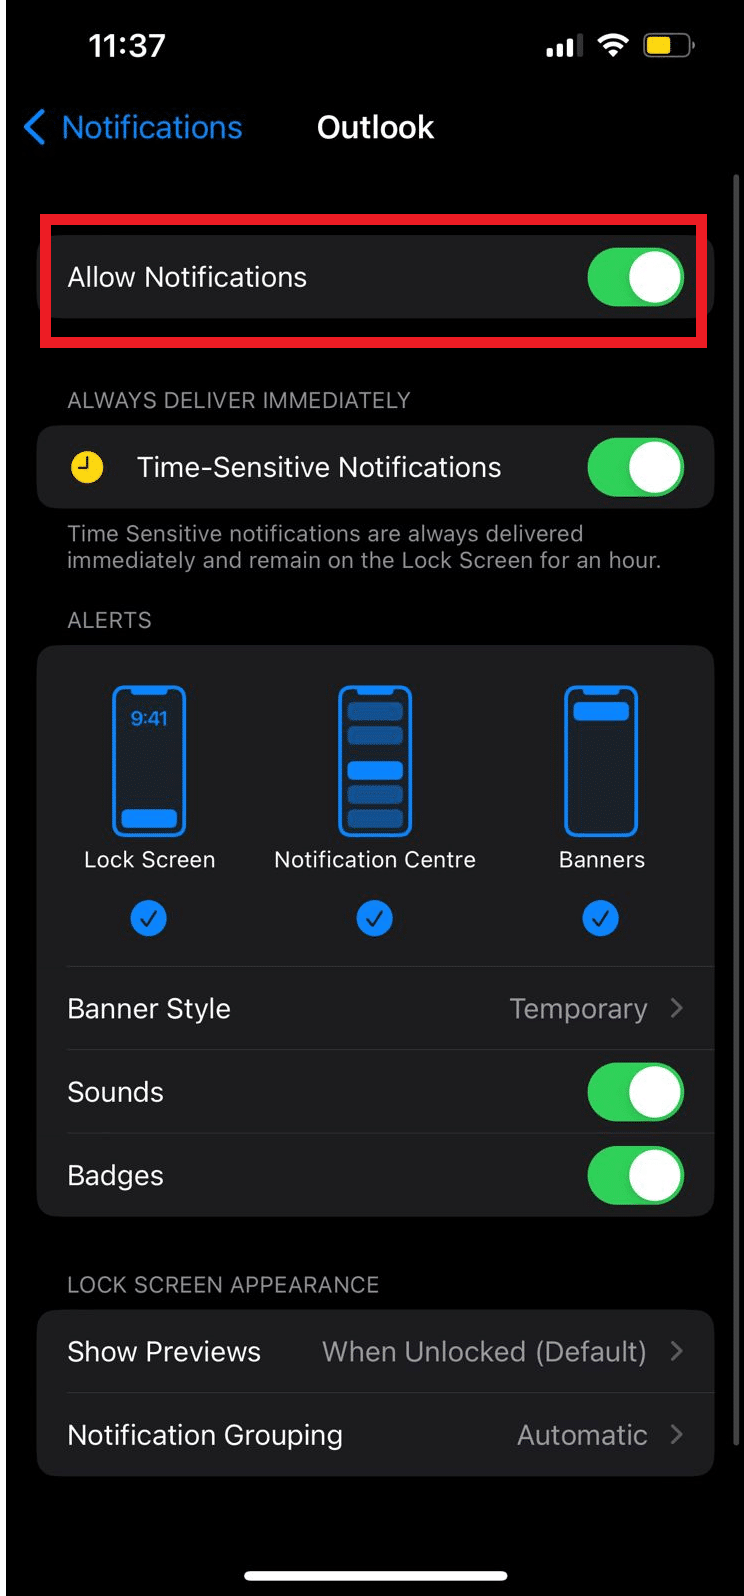 locate the Allow Notifications option and turn the toggle on or off.